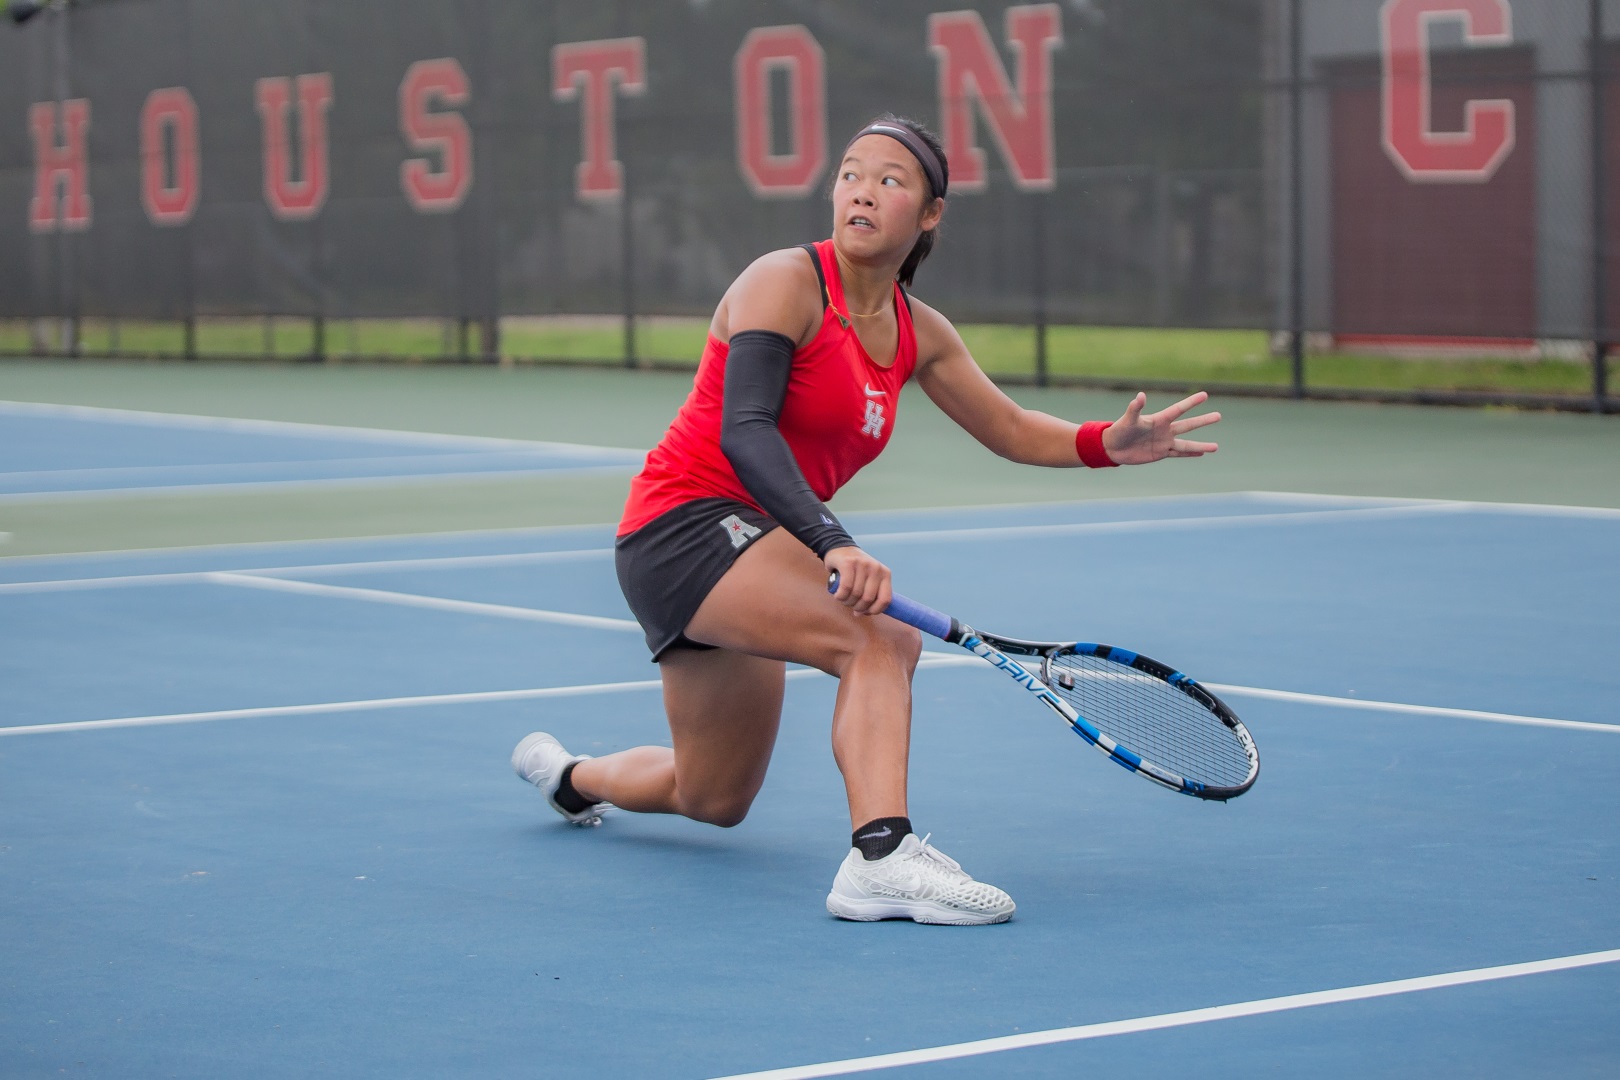 UH tennis senior Phonexay Chitdara, who played key stretches for the Cougars over the weekend, stretches for the ball in a match in 2019. | File photo